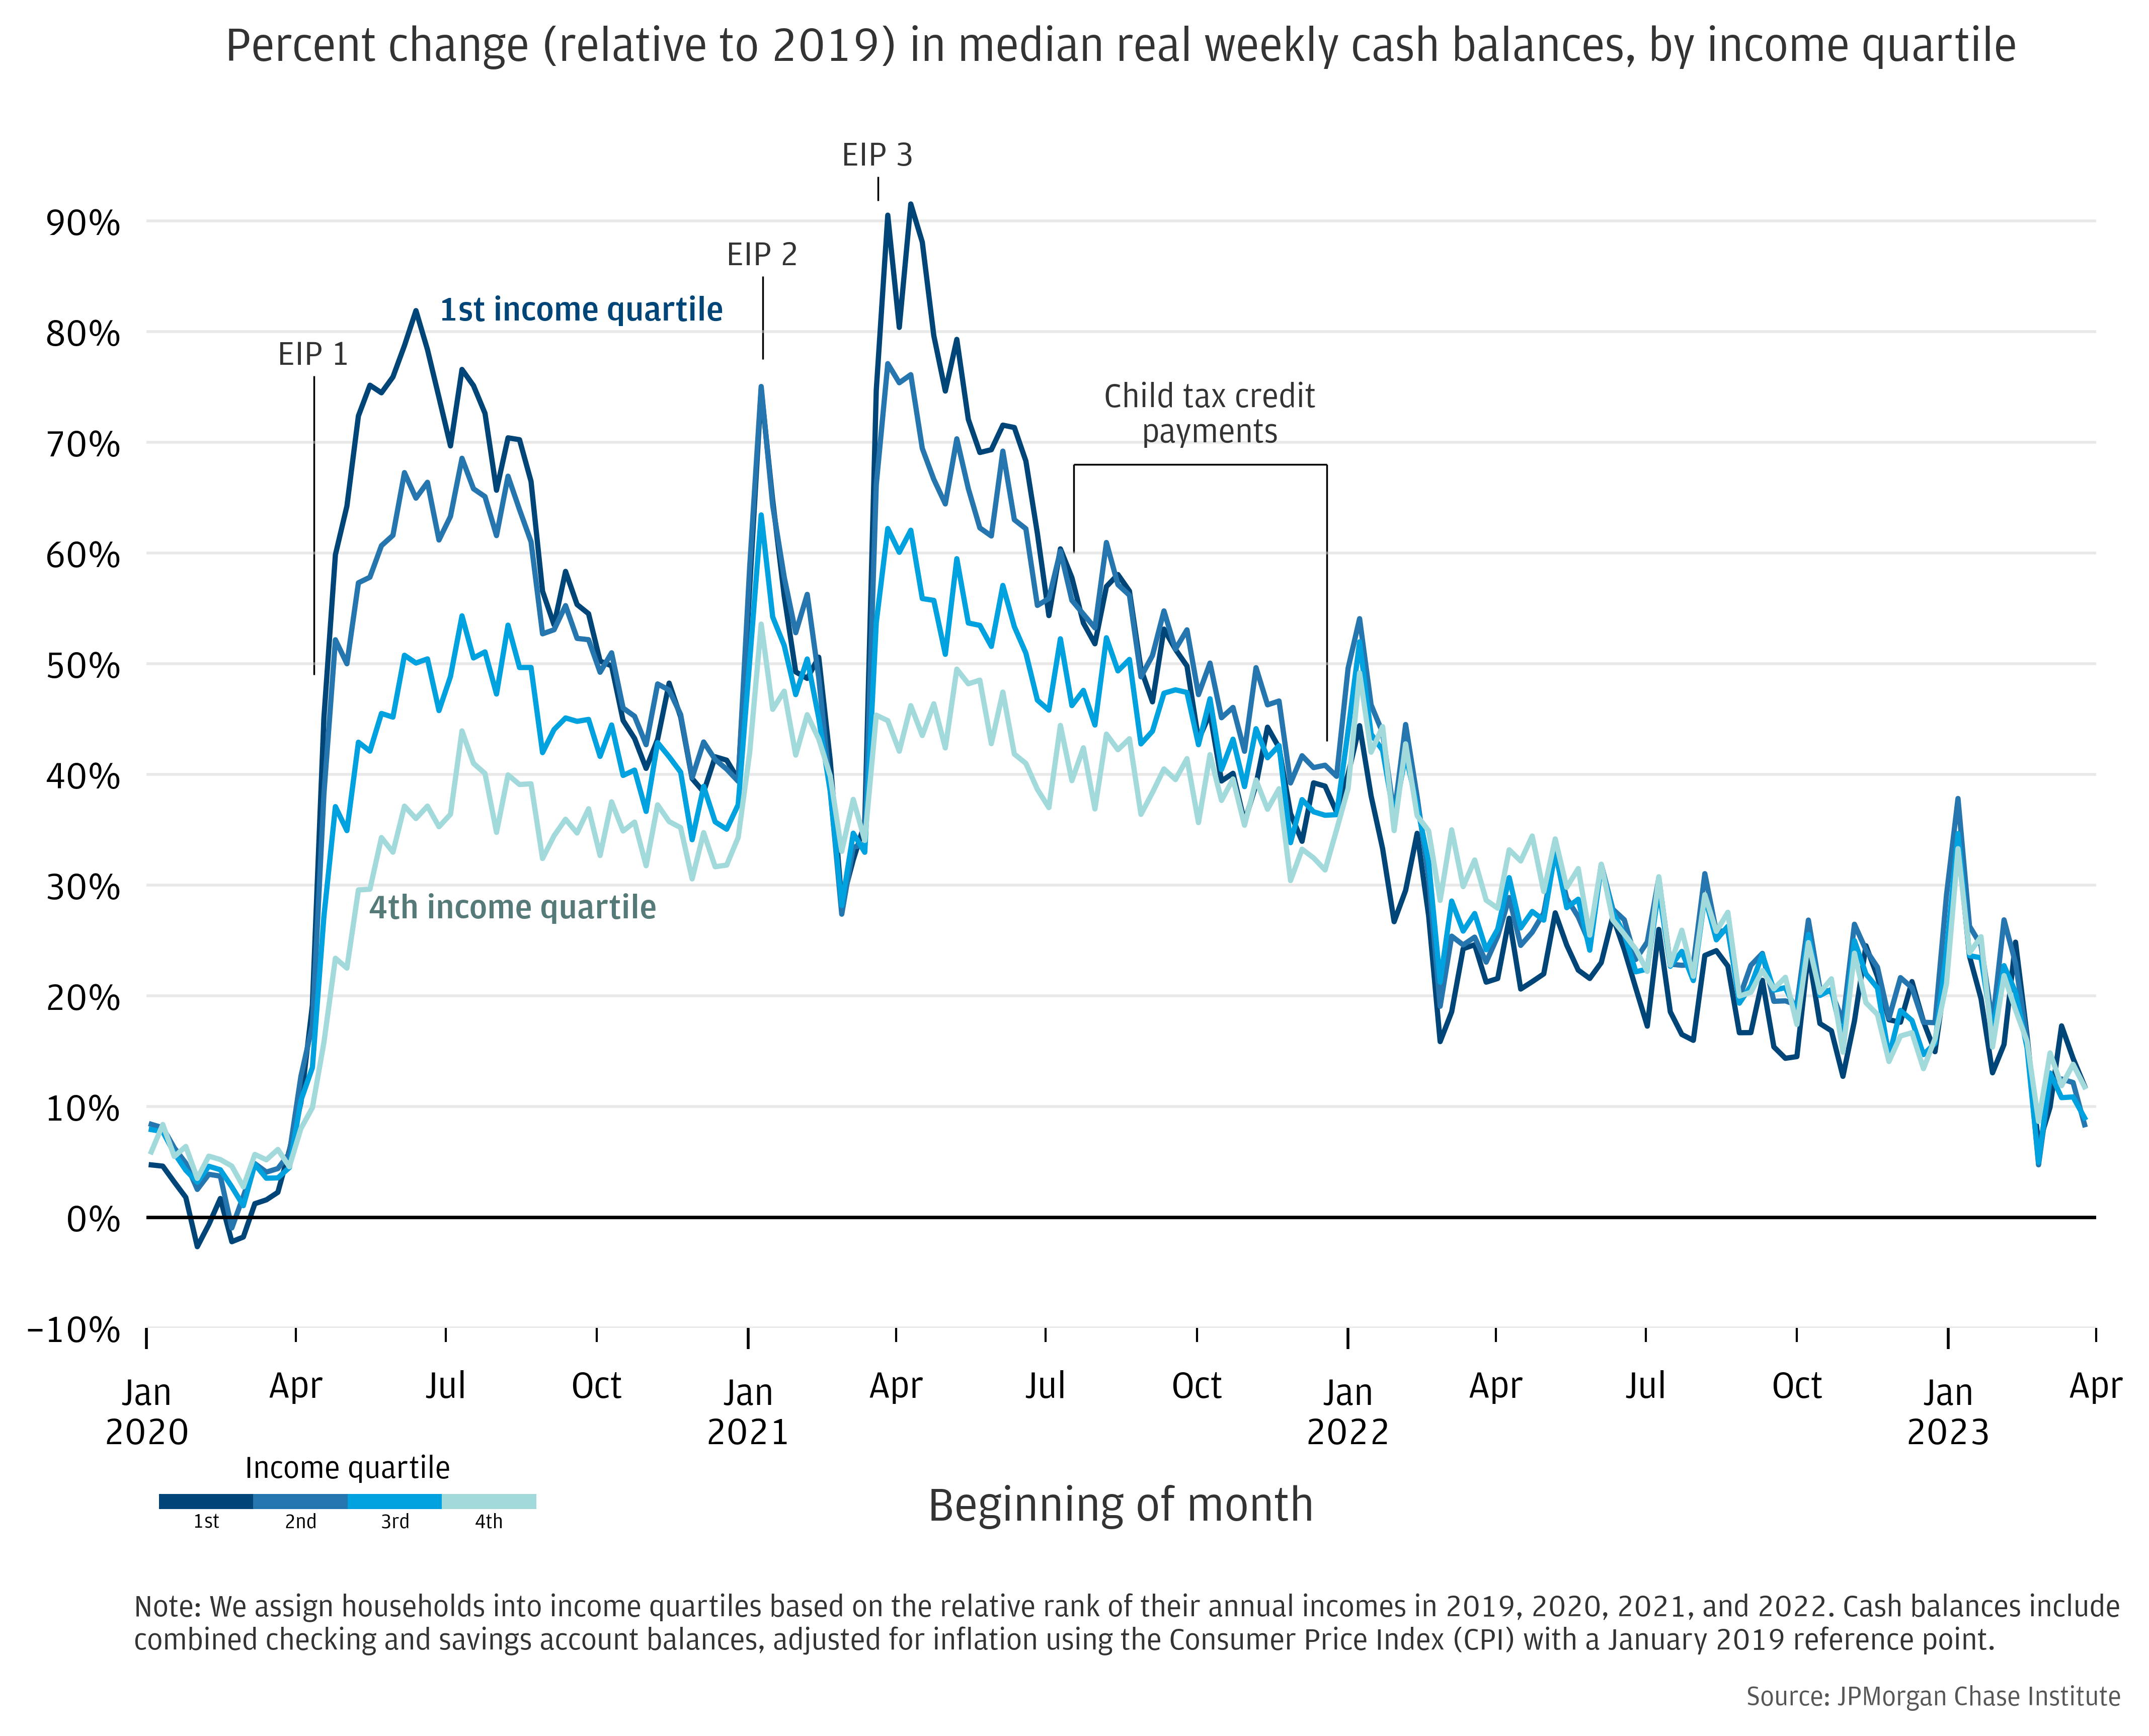 Percent change (relative to 2019) in median weekly cash balances, by income quartile